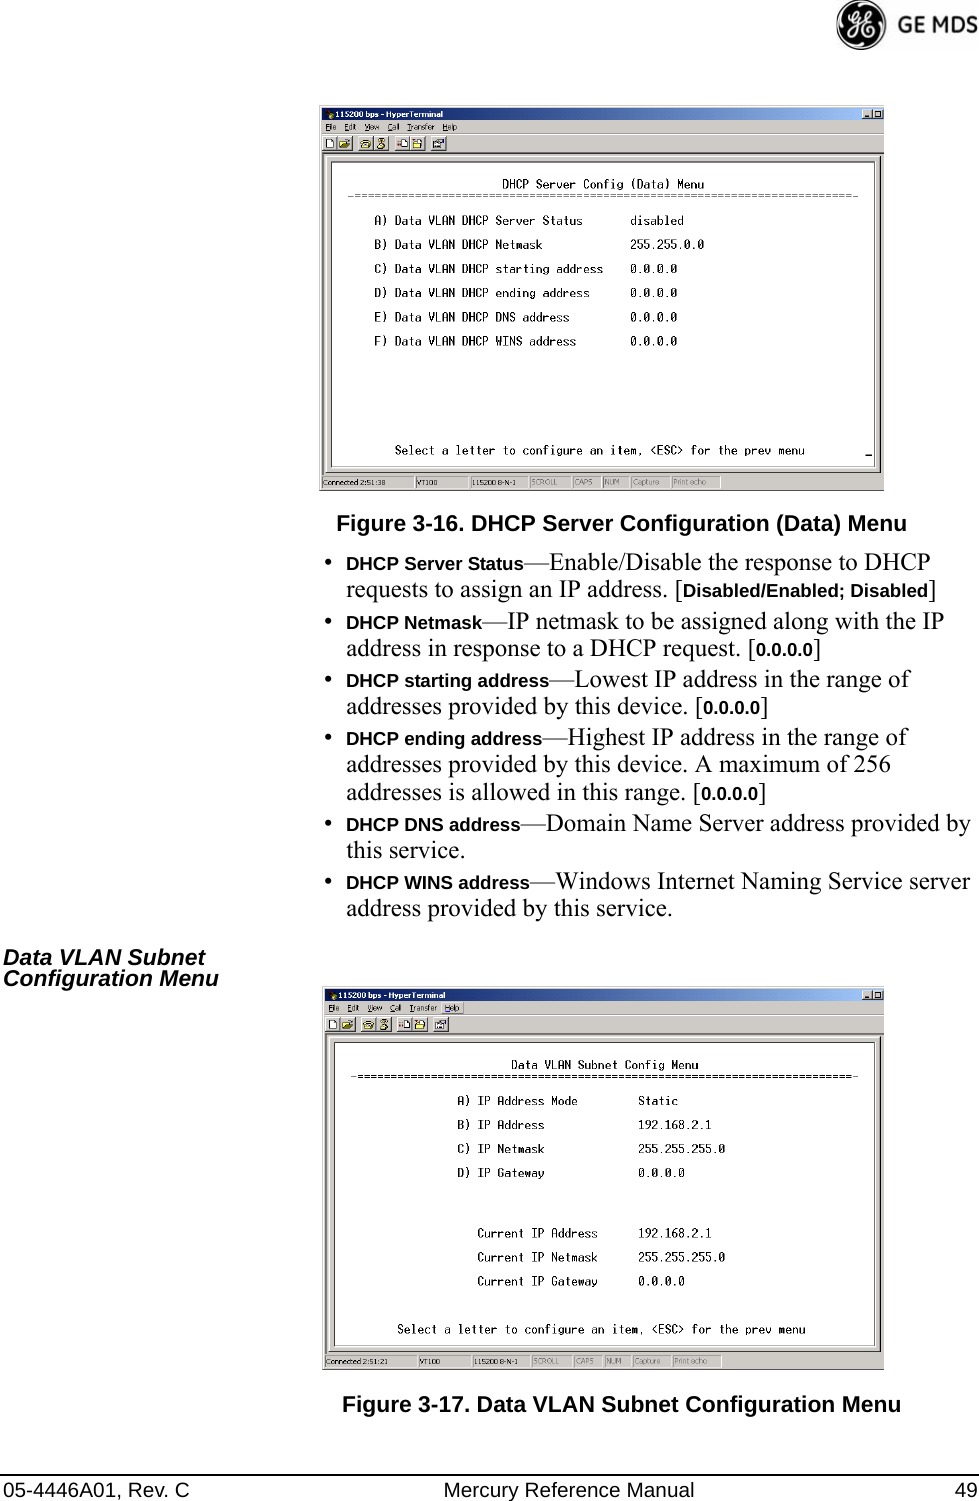 05-4446A01, Rev. C Mercury Reference Manual 49Invisible place holderFigure 3-16. DHCP Server Configuration (Data) Menu•DHCP Server Status—Enable/Disable the response to DHCP requests to assign an IP address. [Disabled/Enabled; Disabled]•DHCP Netmask—IP netmask to be assigned along with the IP address in response to a DHCP request. [0.0.0.0]•DHCP starting address—Lowest IP address in the range of addresses provided by this device. [0.0.0.0]•DHCP ending address—Highest IP address in the range of addresses provided by this device. A maximum of 256 addresses is allowed in this range. [0.0.0.0]•DHCP DNS address—Domain Name Server address provided by this service.•DHCP WINS address—Windows Internet Naming Service server address provided by this service.Data VLAN Subnet Configuration Menu Invisible place holderFigure 3-17. Data VLAN Subnet Configuration Menu  